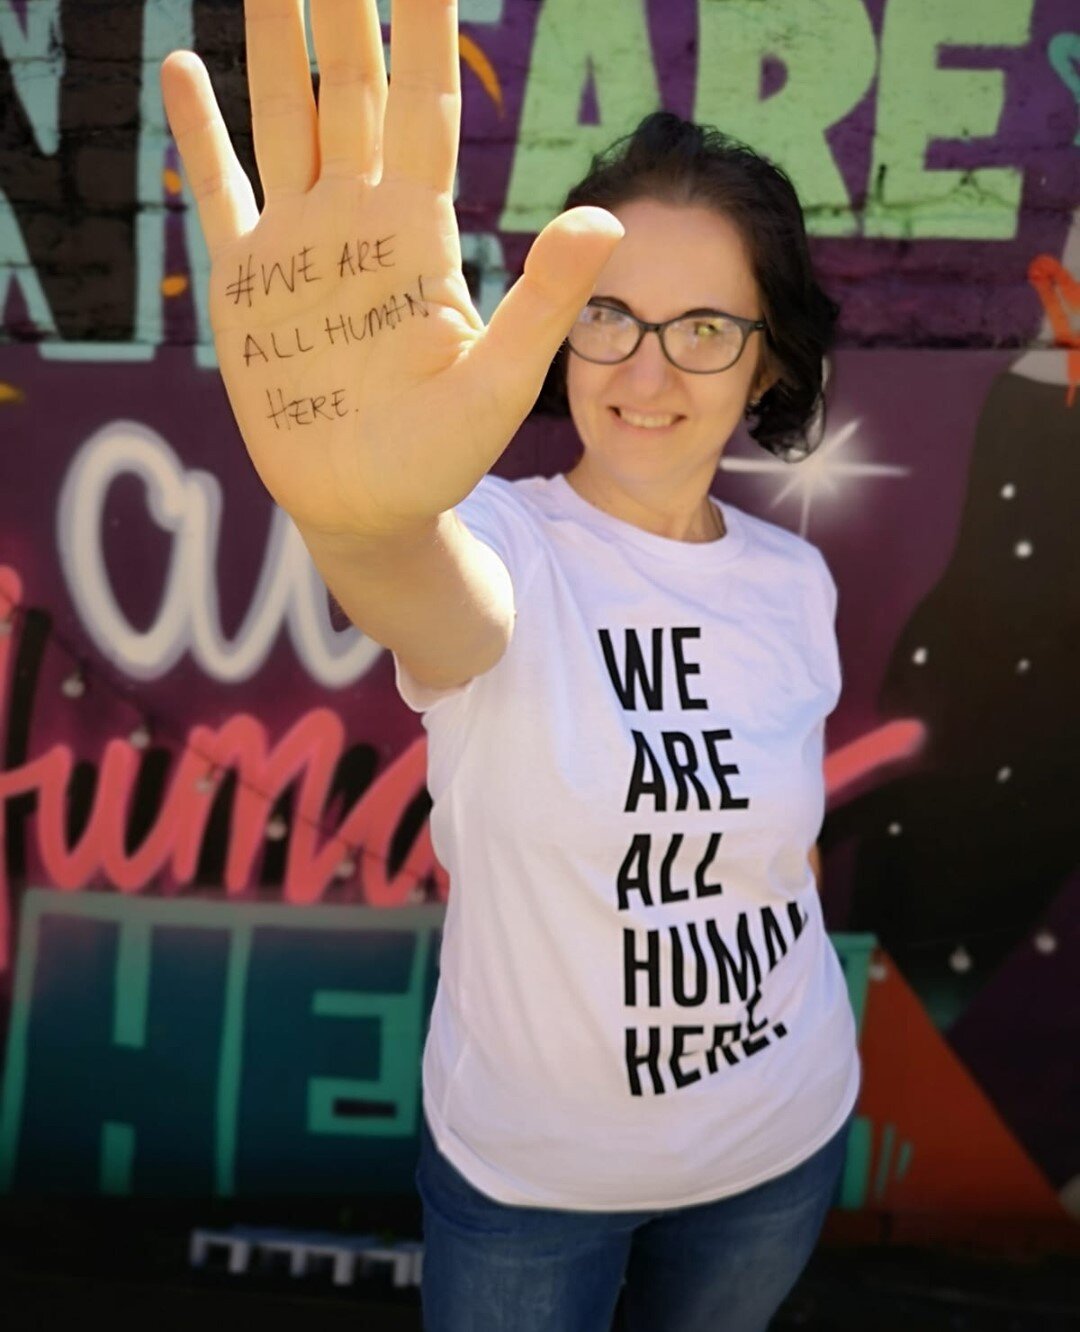 Have you got yours yet? 

#weareallhumanhere